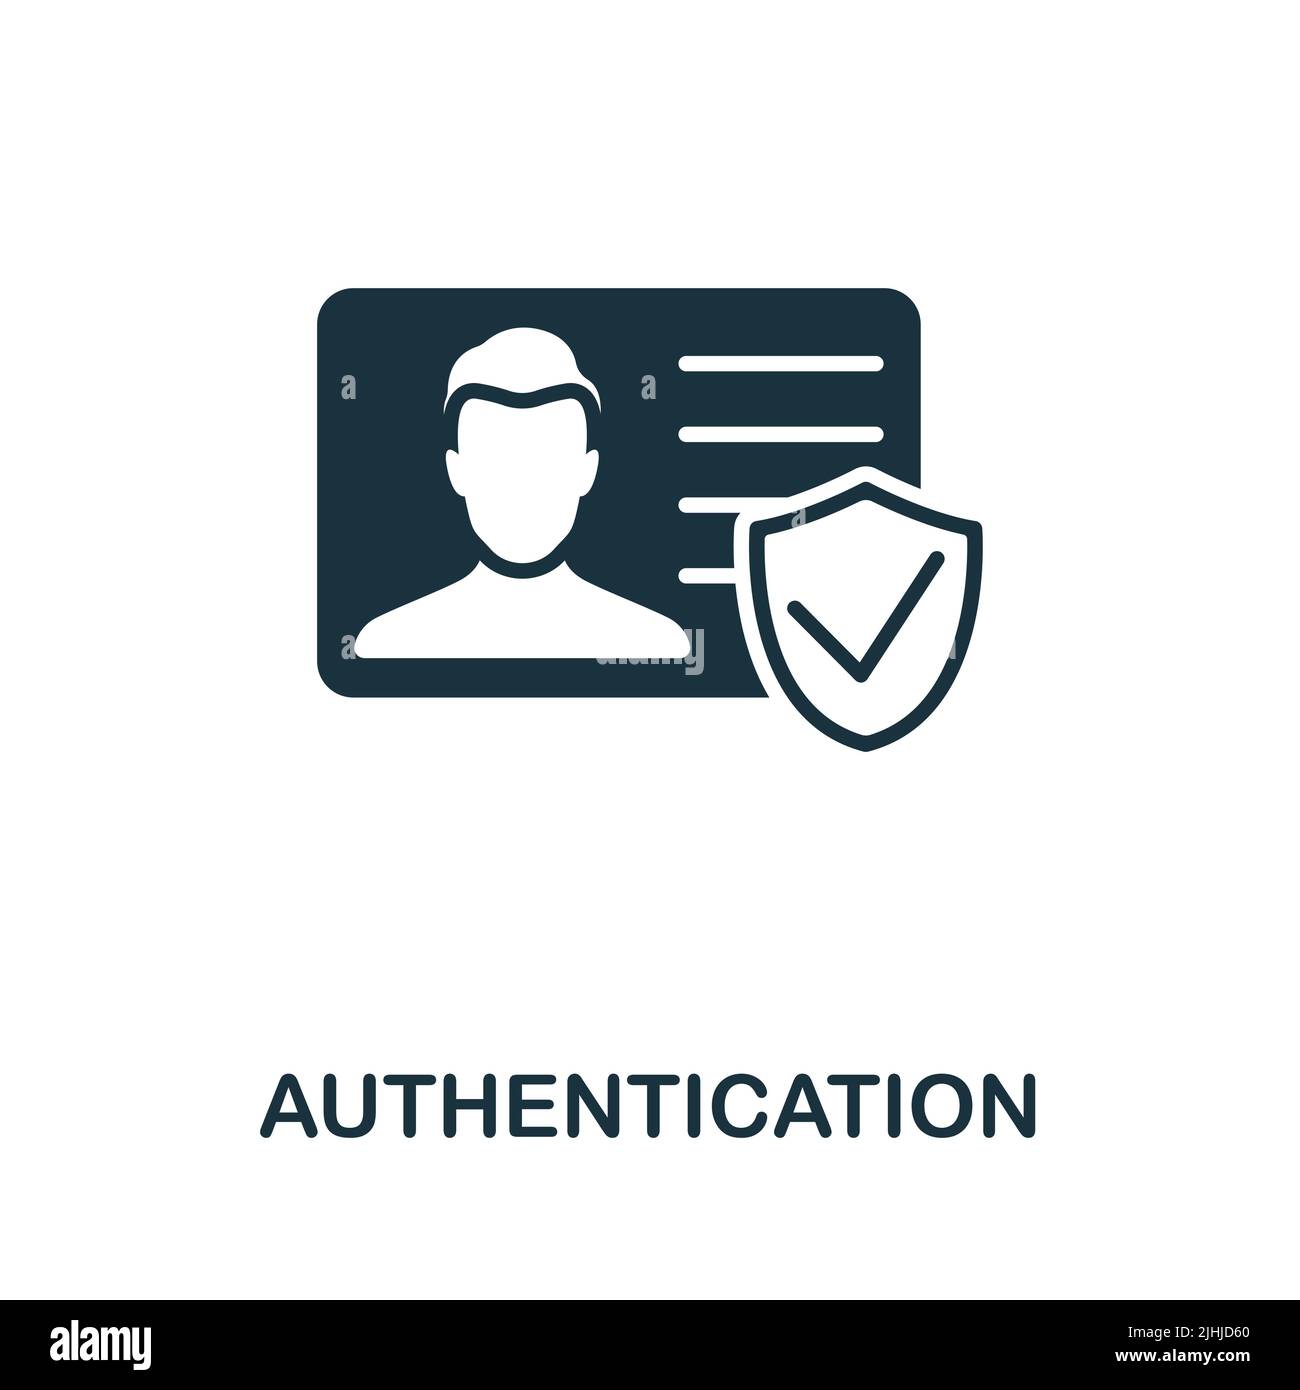 Authentication icon. Monochrome simple Cybercrime icon for templates, web design and infographics Stock Vector